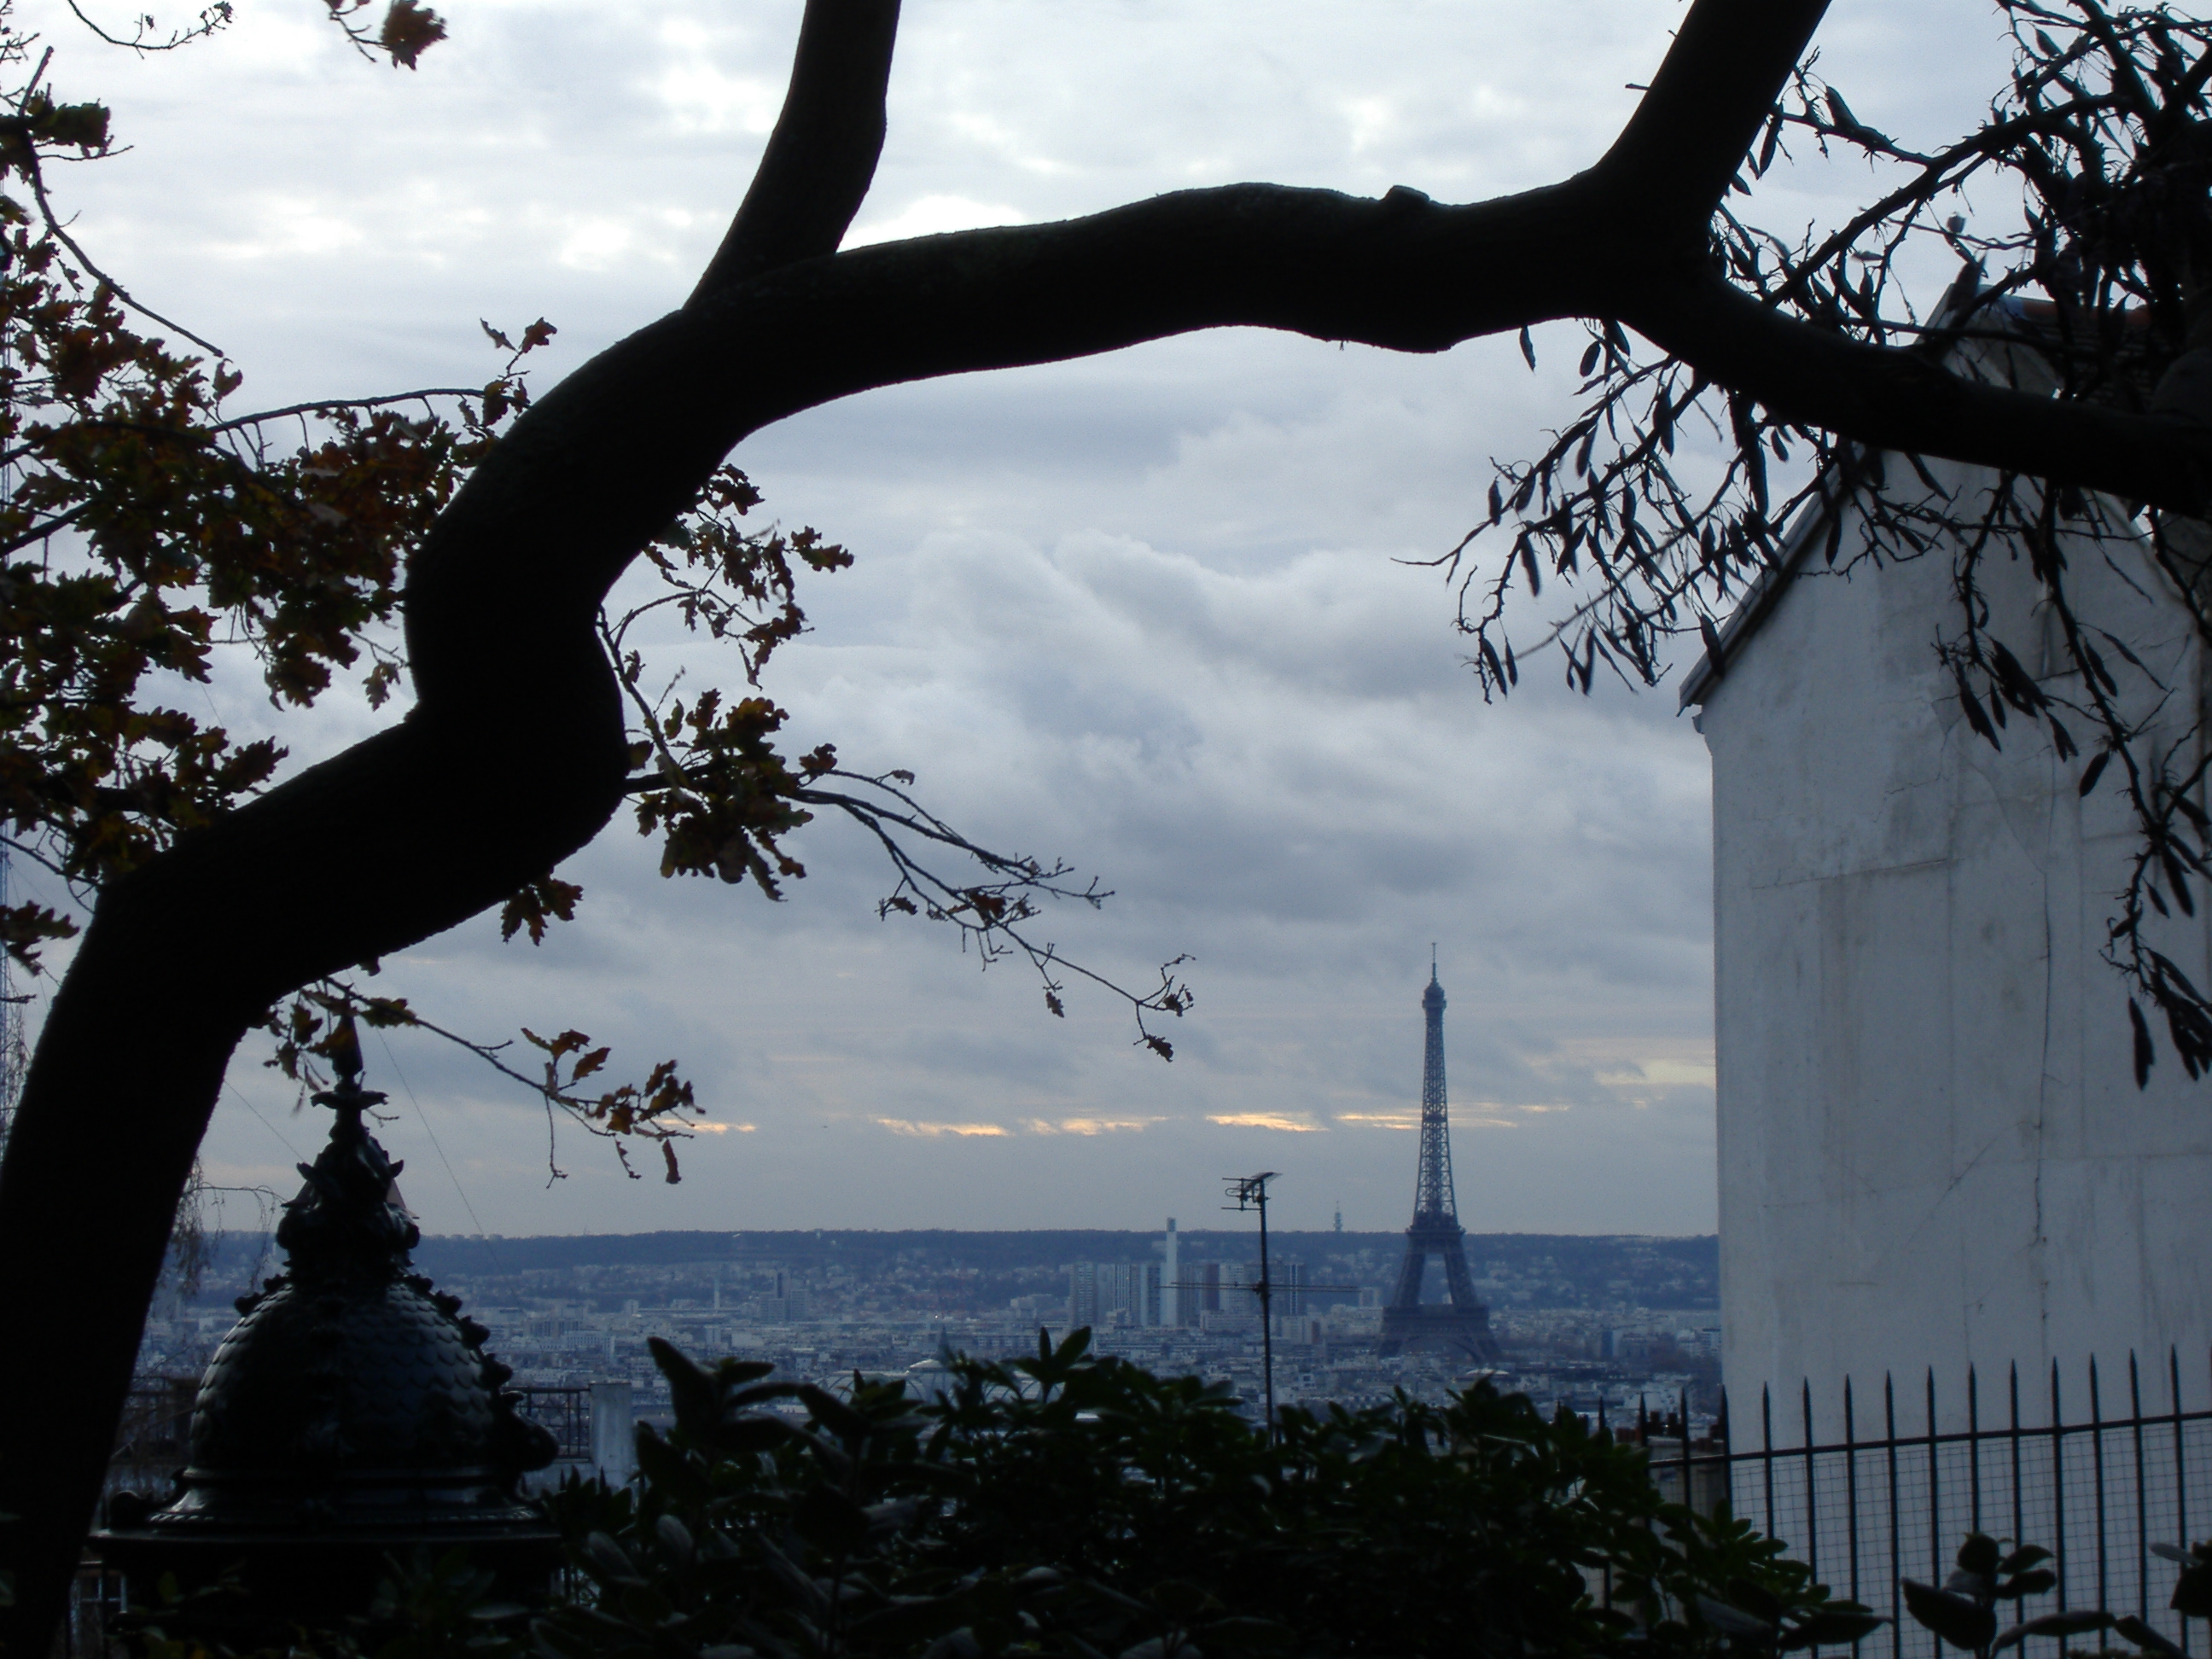 The view from Sacre Coeur